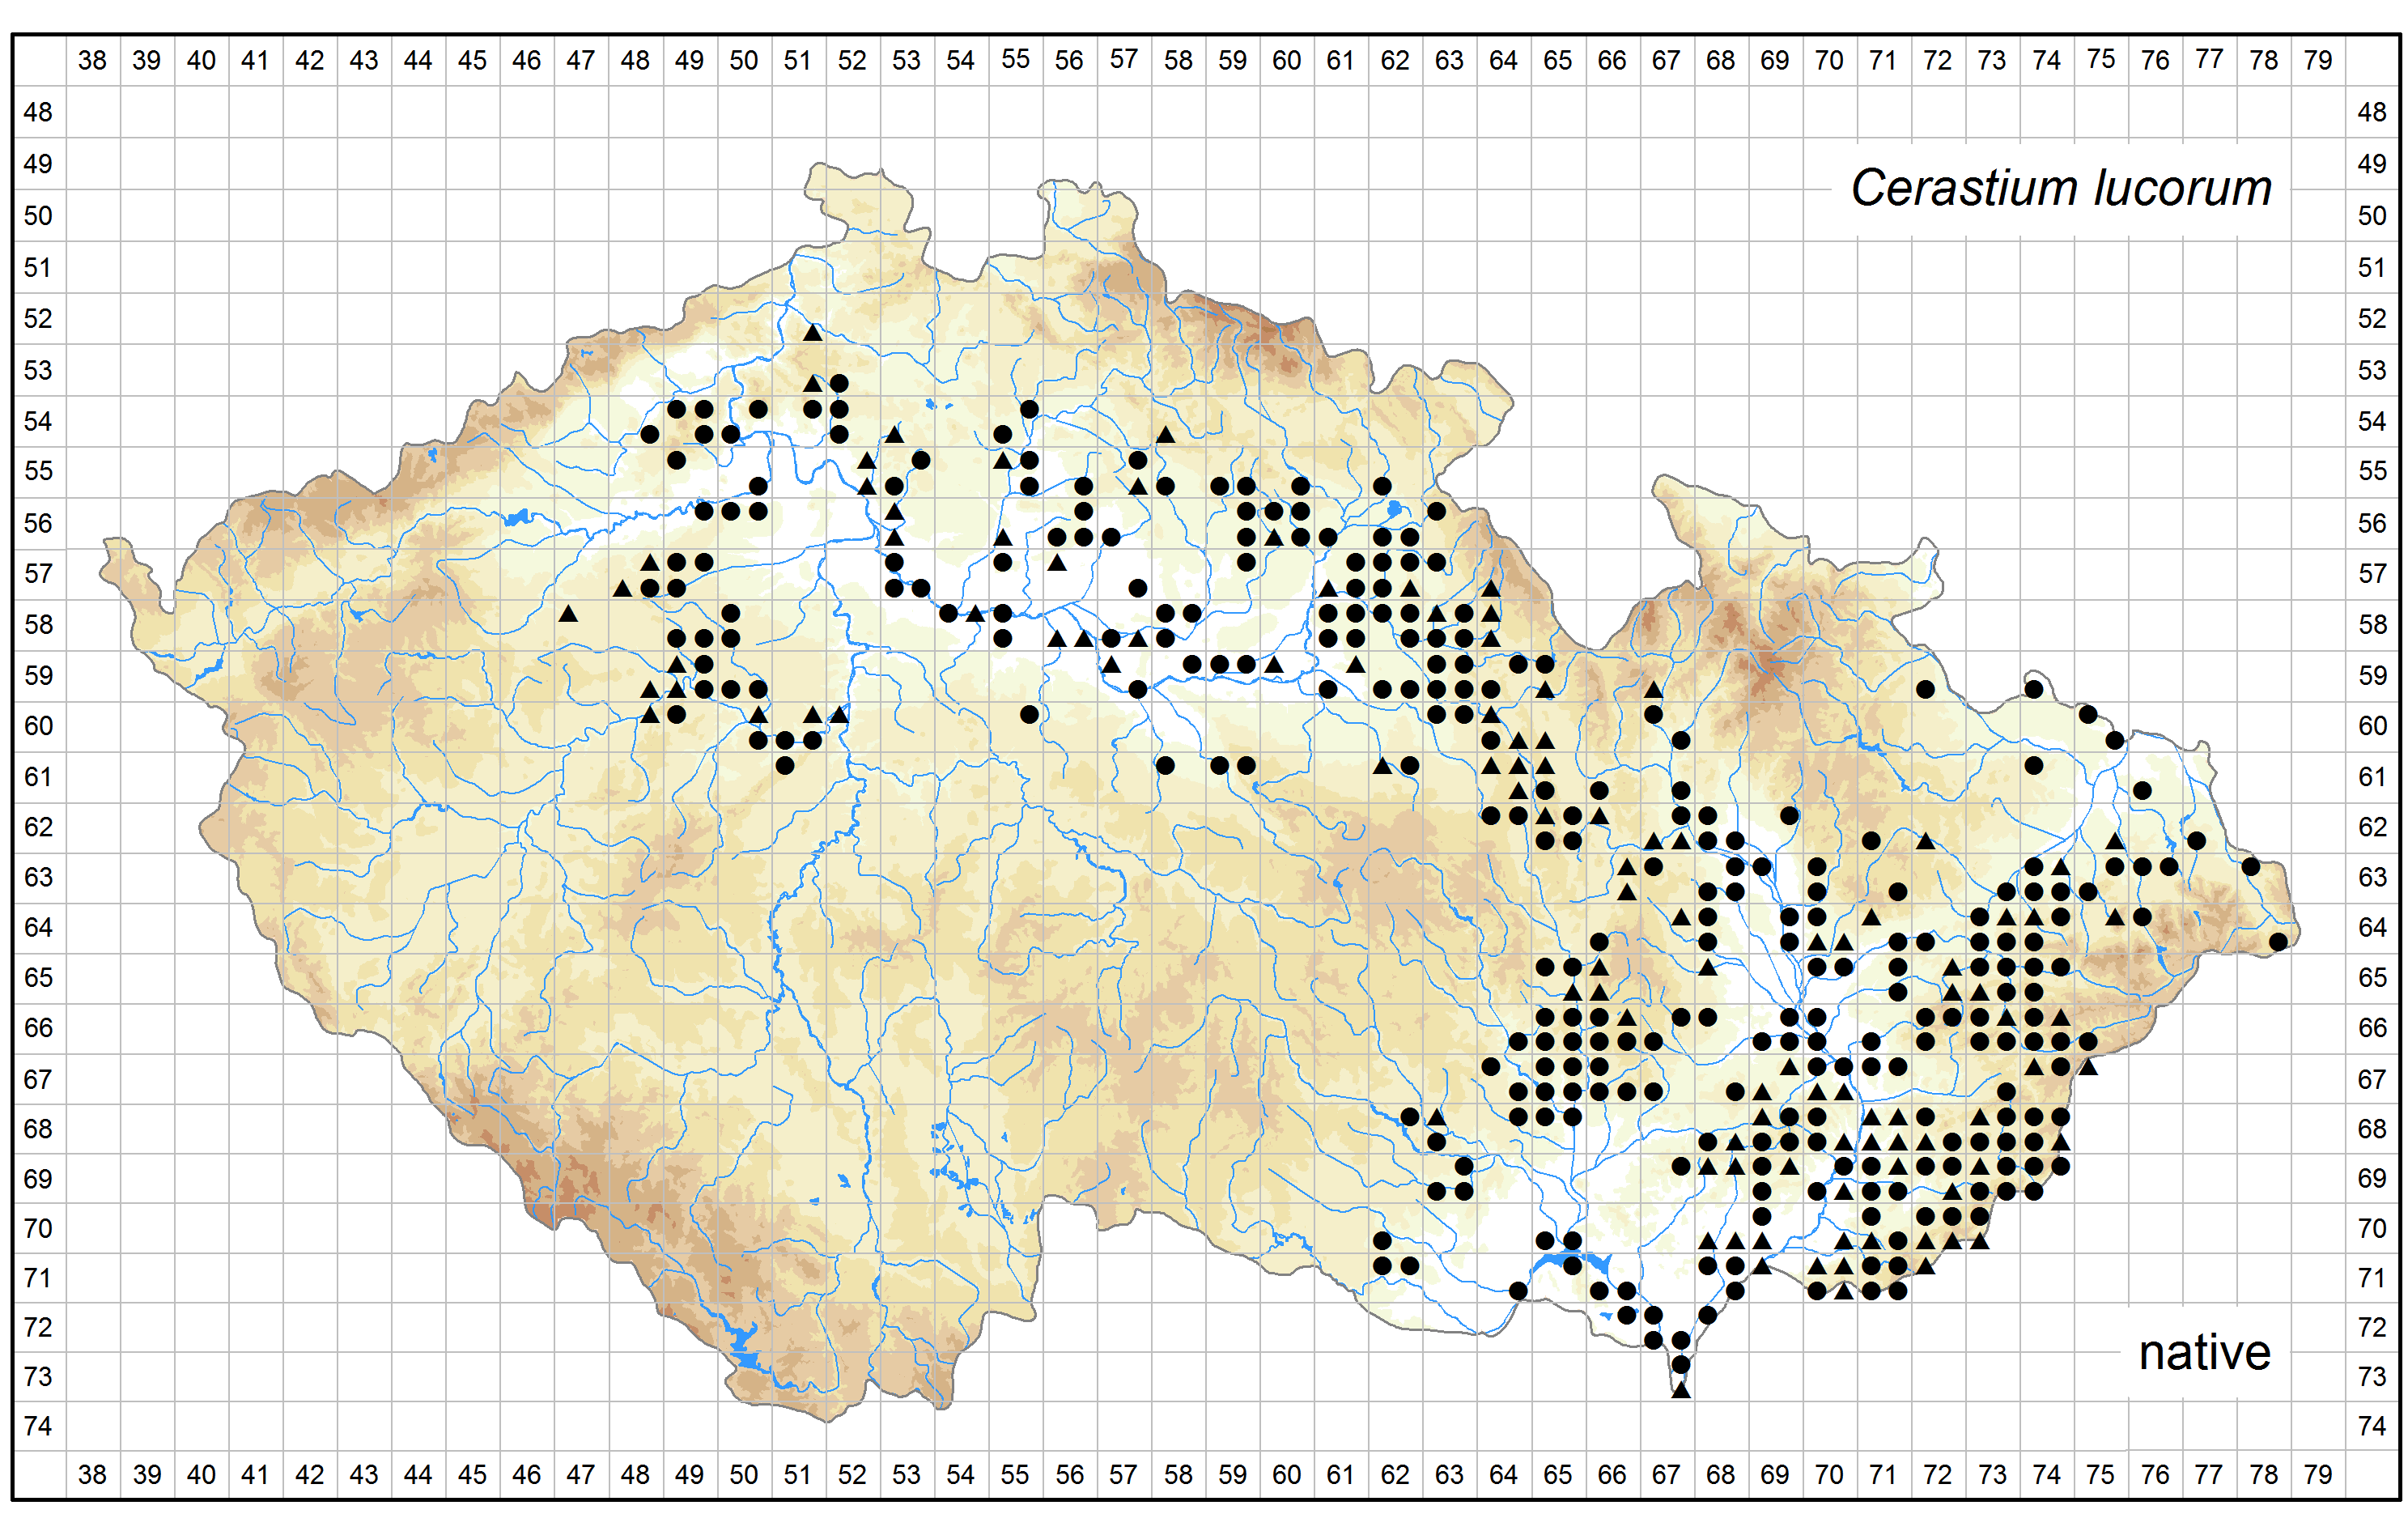 Distribution of Cerastium lucorum in the Czech Republic Author of the map: Jiří Danihelka, Michal Ducháček, Zdeněk Kaplan Map produced on: 07-11-2016 Database records used for producing the